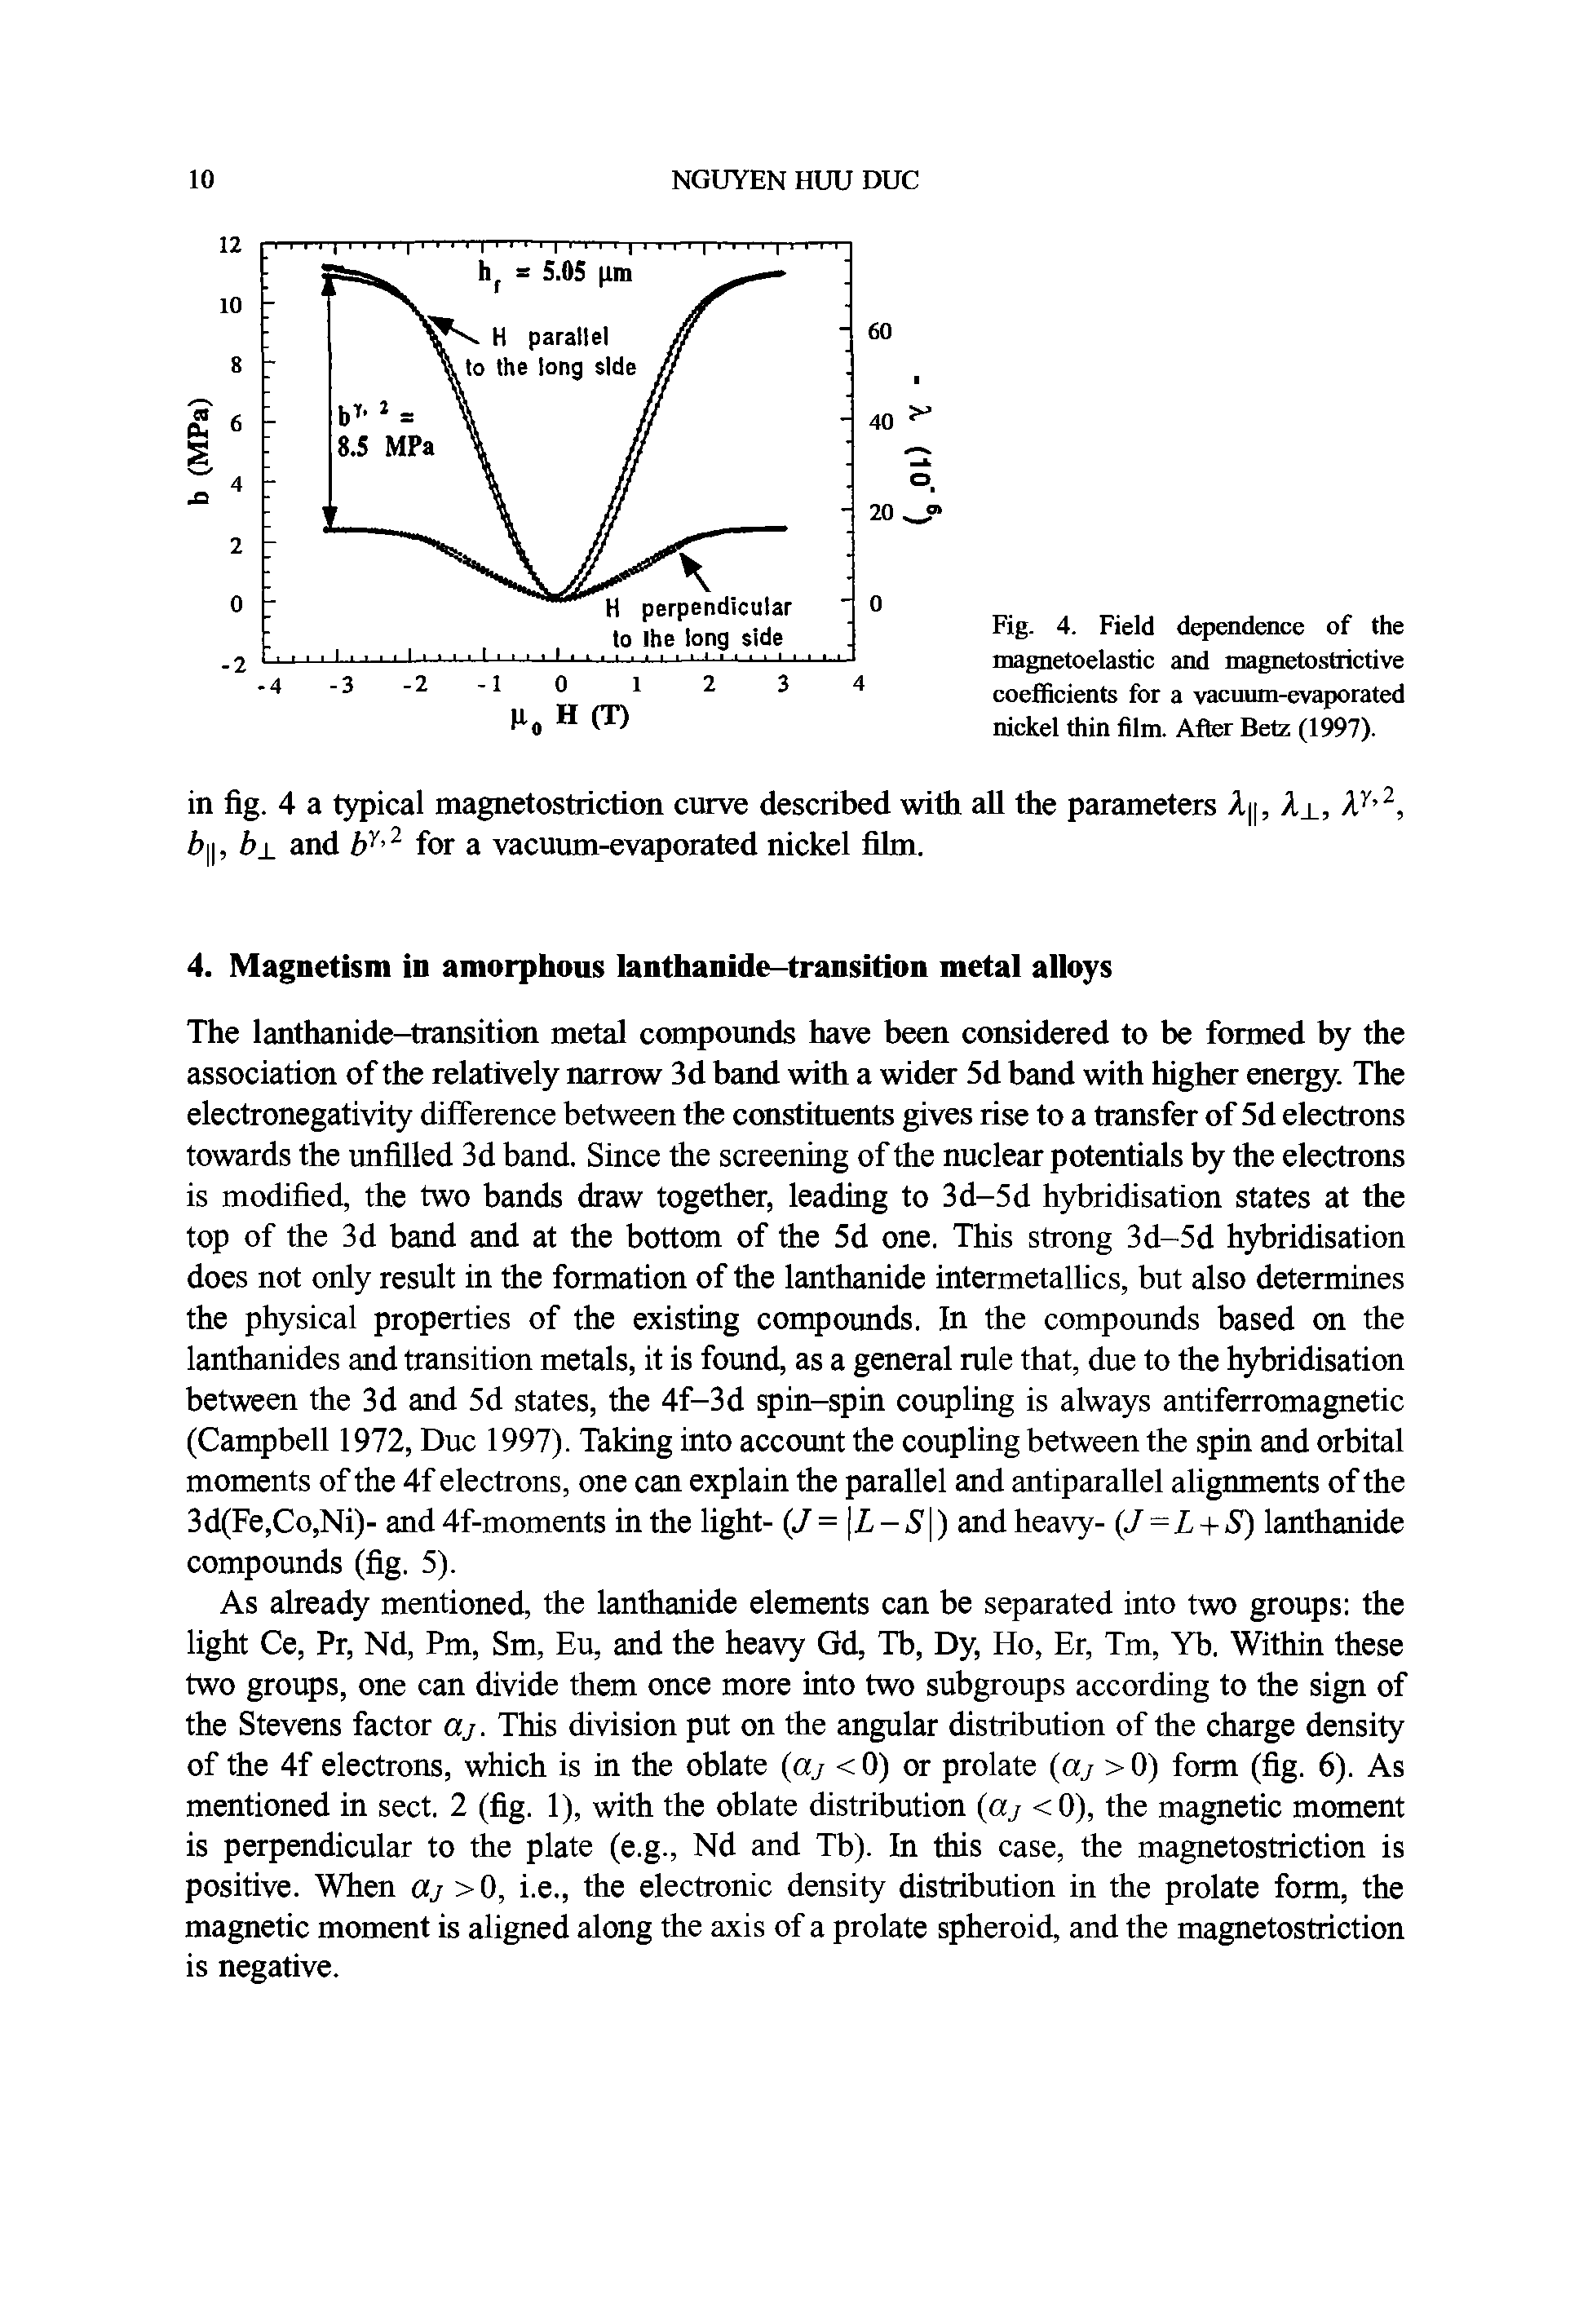 Fig. 4. Field dependence of the magnetoelastic and magnetostrictive coefficients for a vacuum-evaporated nickel thin film. After Betz (1997).